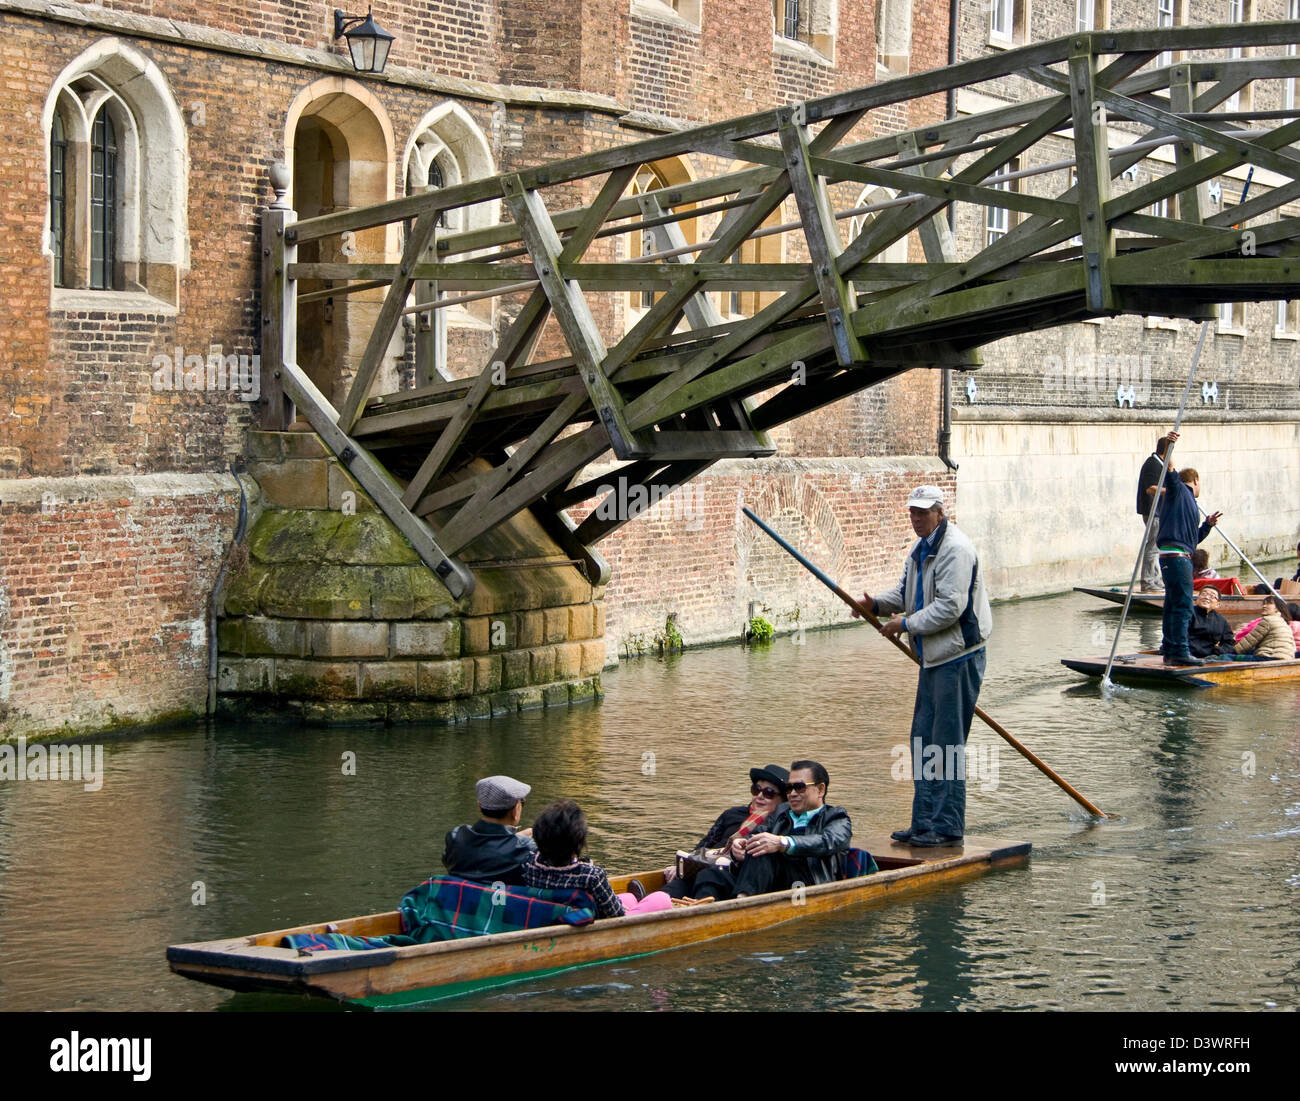 Punting on River Cam 'The Backs' by Mathematical bridge Queens College Cambridge Cambridgeshire England Europe Stock Photo